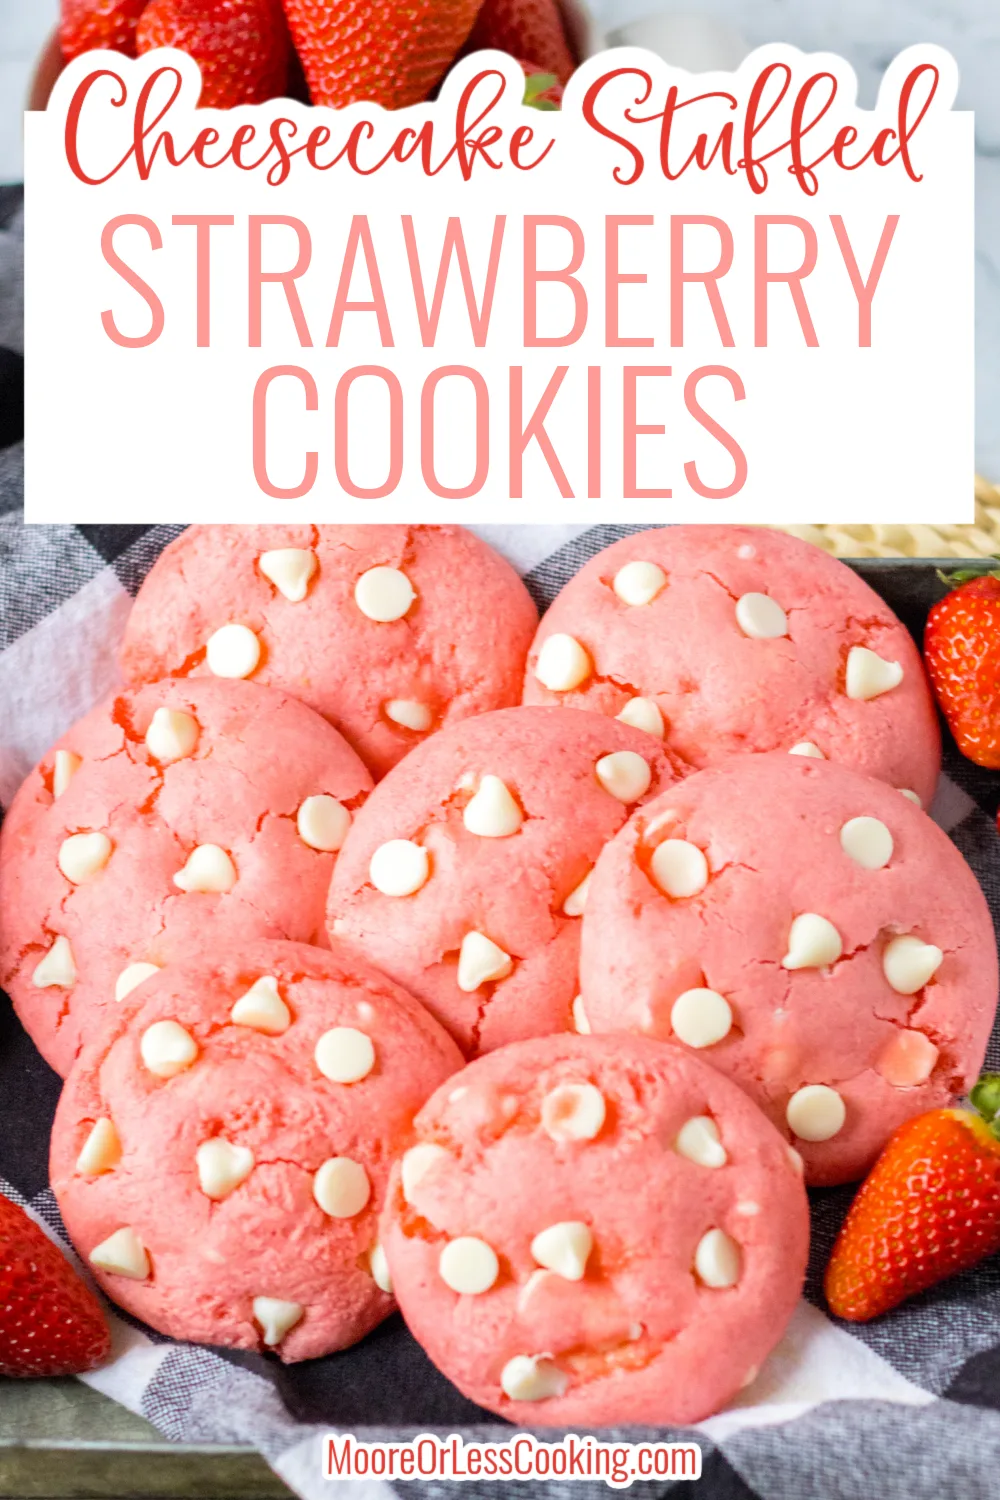 You'll love these Cheesecake Stuffed Strawberry Cookies that use a boxed cake mix to create these incredibly easy berry-flavored sweet treats. Studded with white chocolate chips, each cookie holds a cream cheese filling that's a decadent surprise when you take that first bite! via @Mooreorlesscook